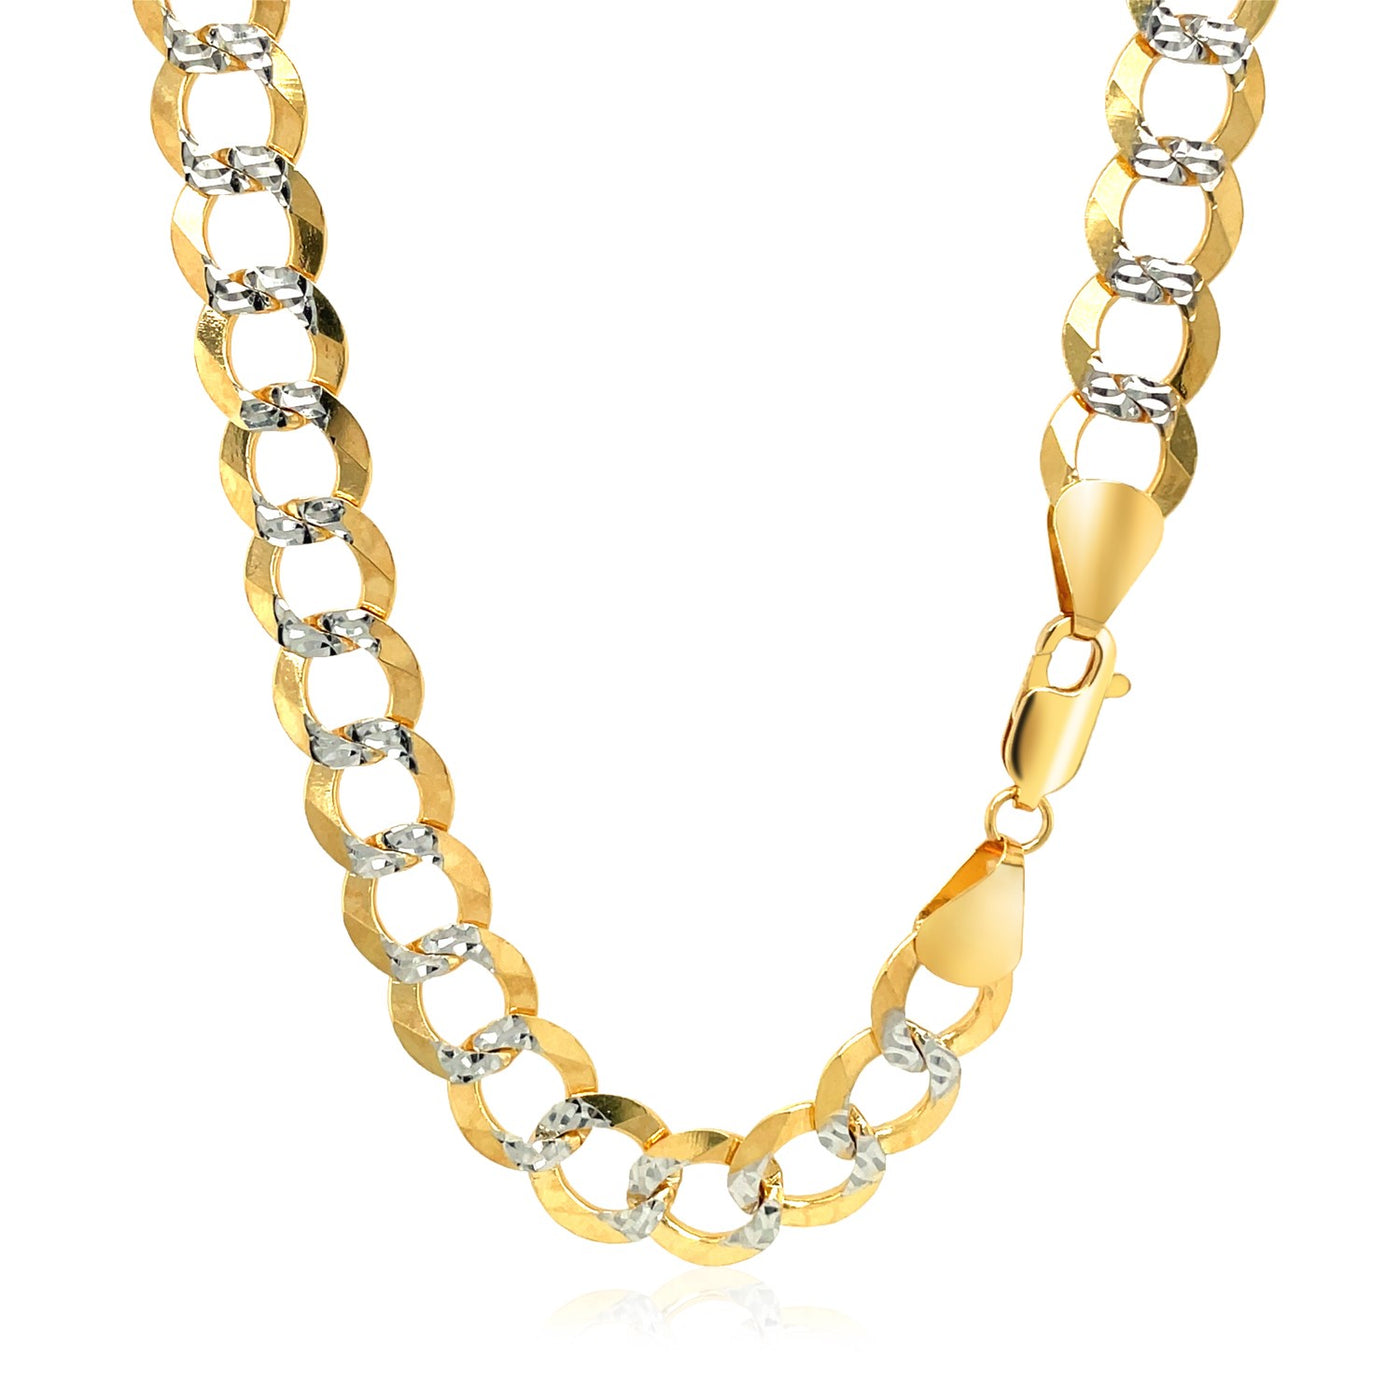 8.2mm 14k Two Tone Gold Pave Curb Chain